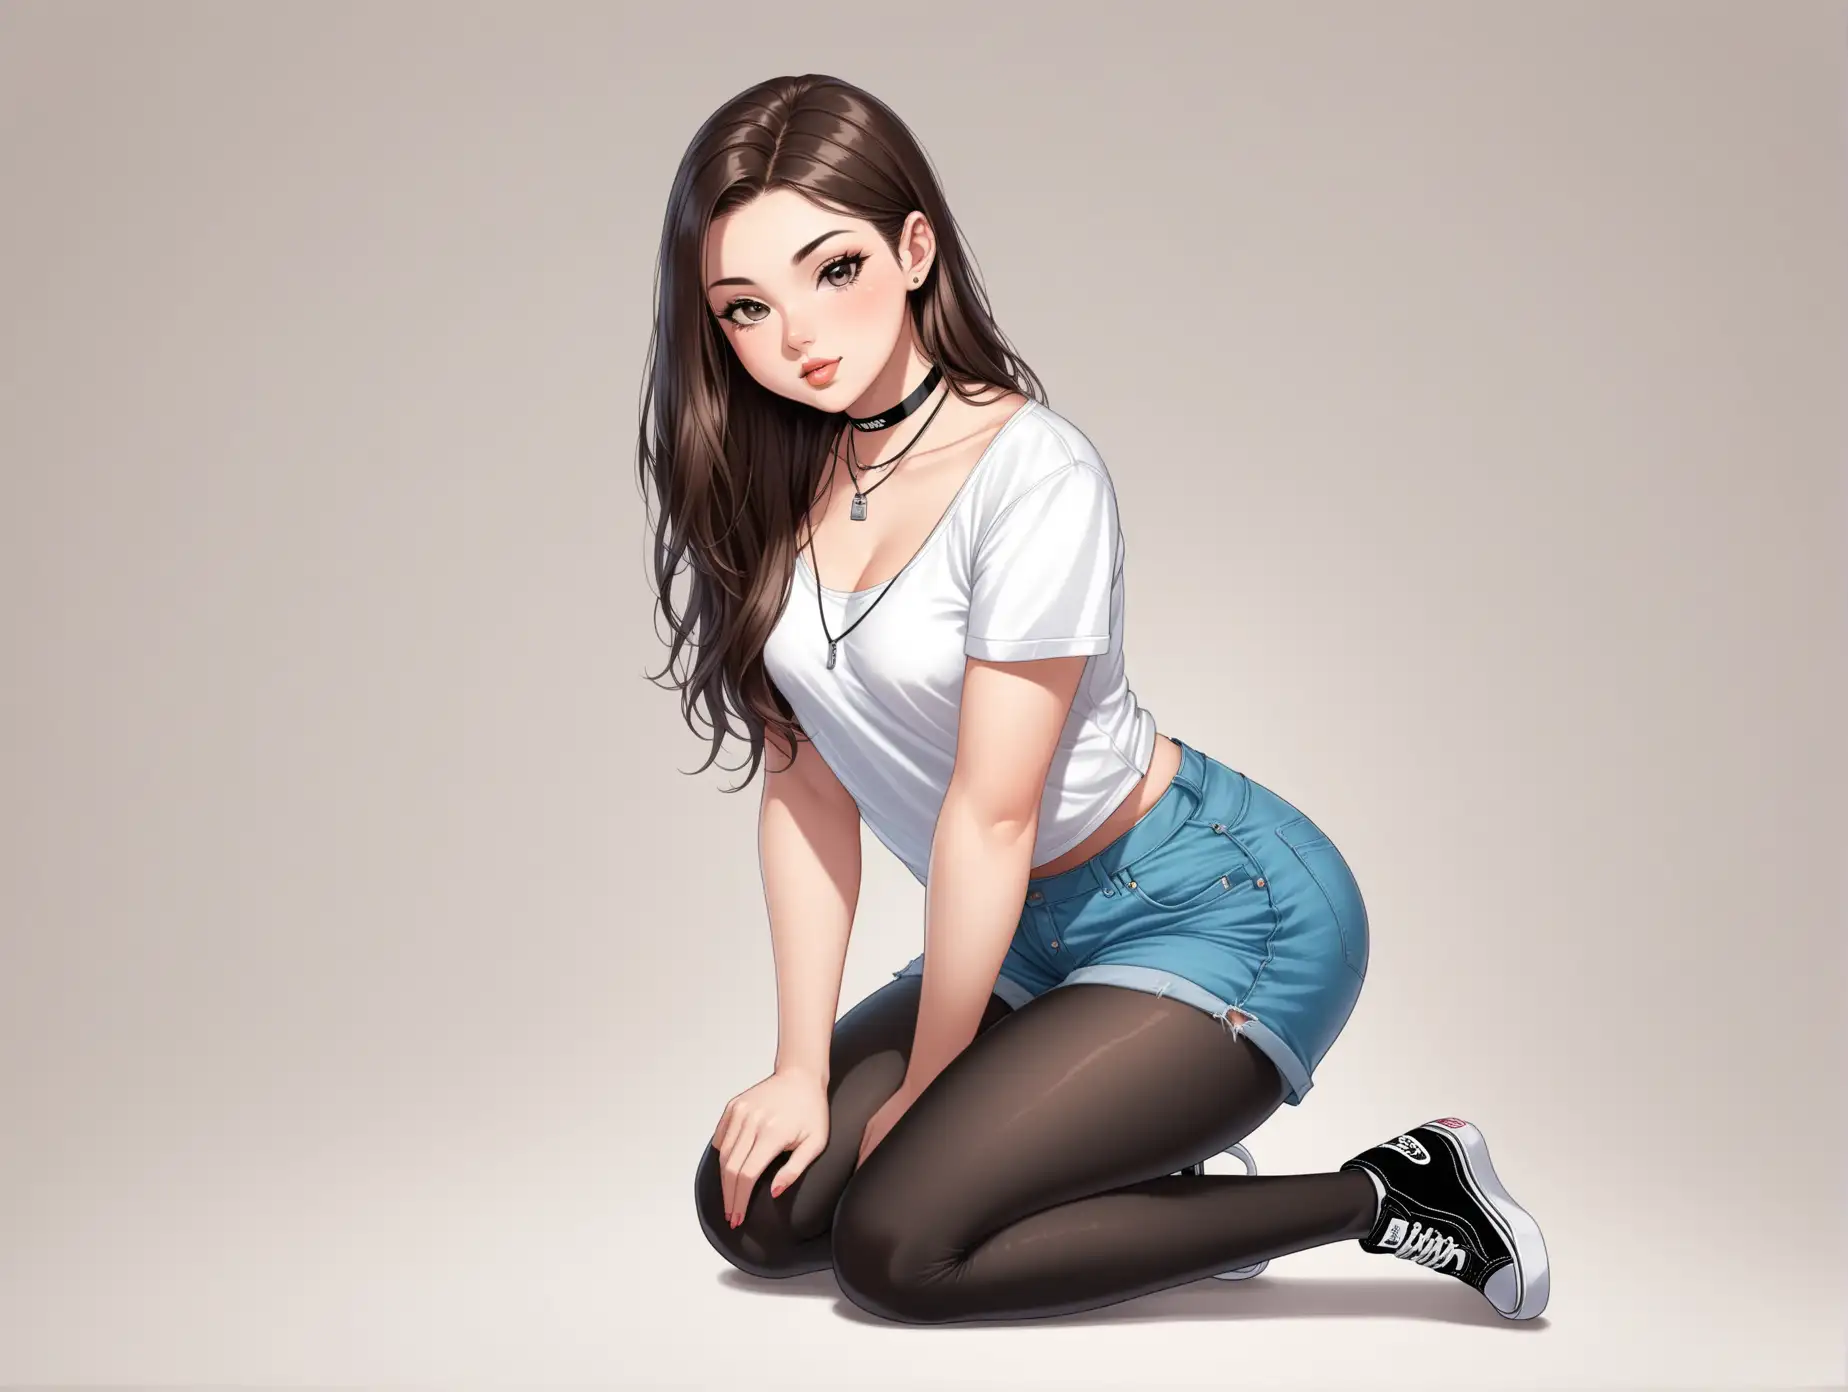 Image: Sensual girl on full body view. 
Position: Kneeling in doggy style pose.
Body: brunette, tall, curvy hips, small breasts.  
Wearing: Shirt, black pantyhose, Vans Eras sneakers, jorts, choker necklace.